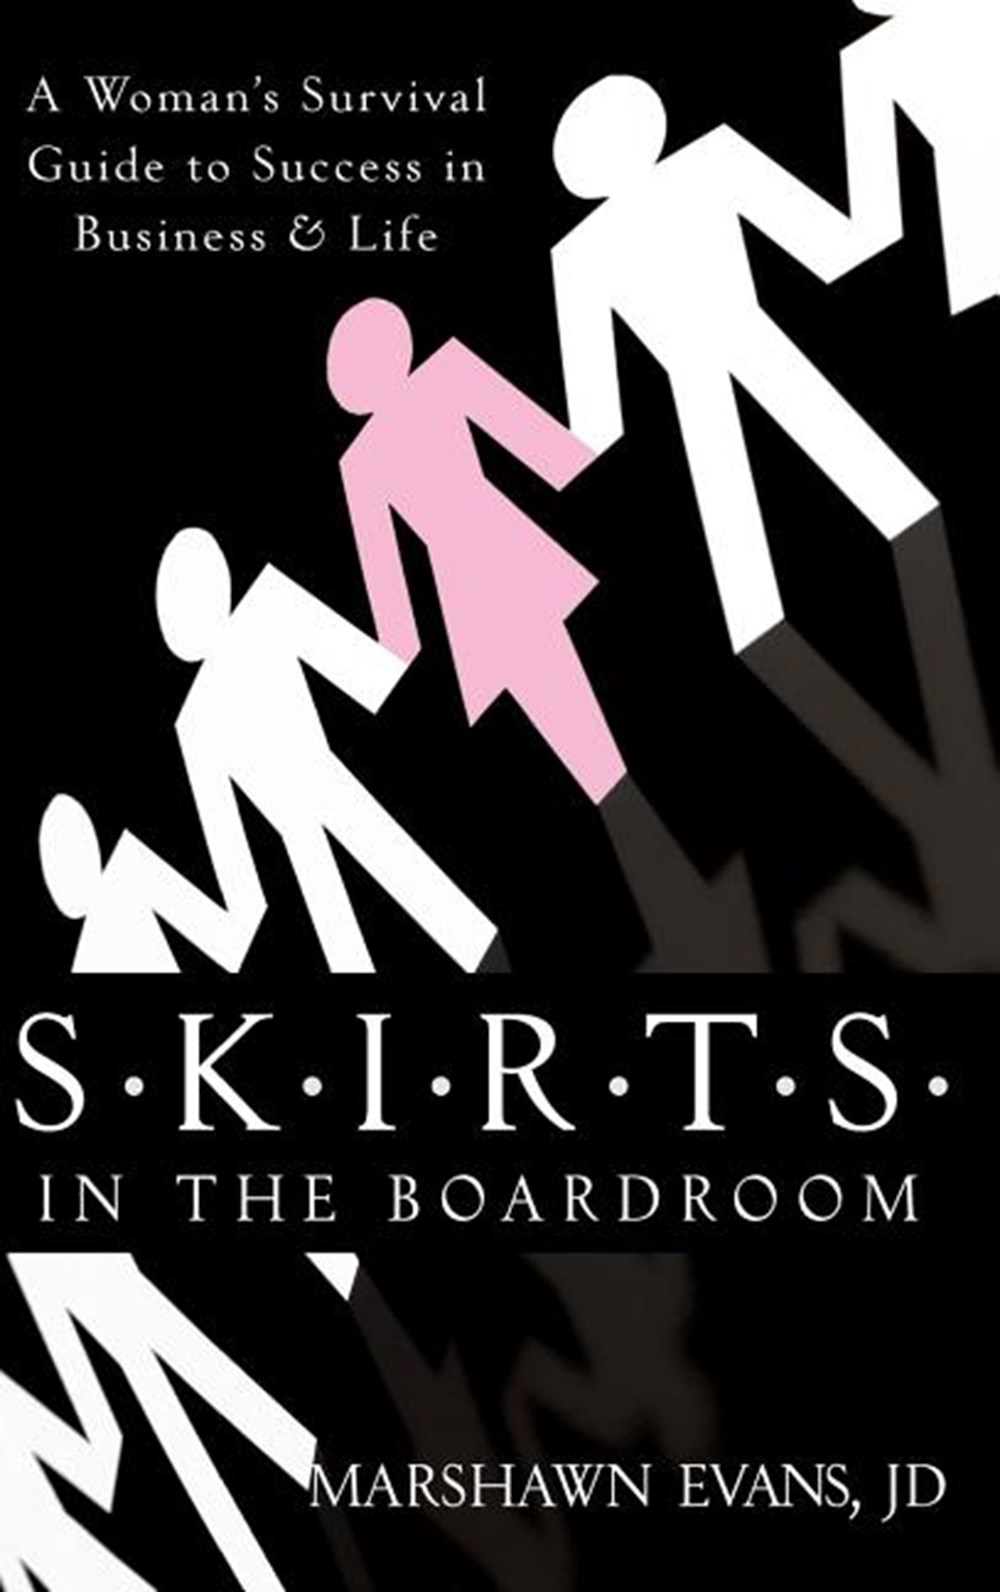 S.K.I.R.T.S in the Boardroom A Woman's Survival Guide to Success in Business and Life